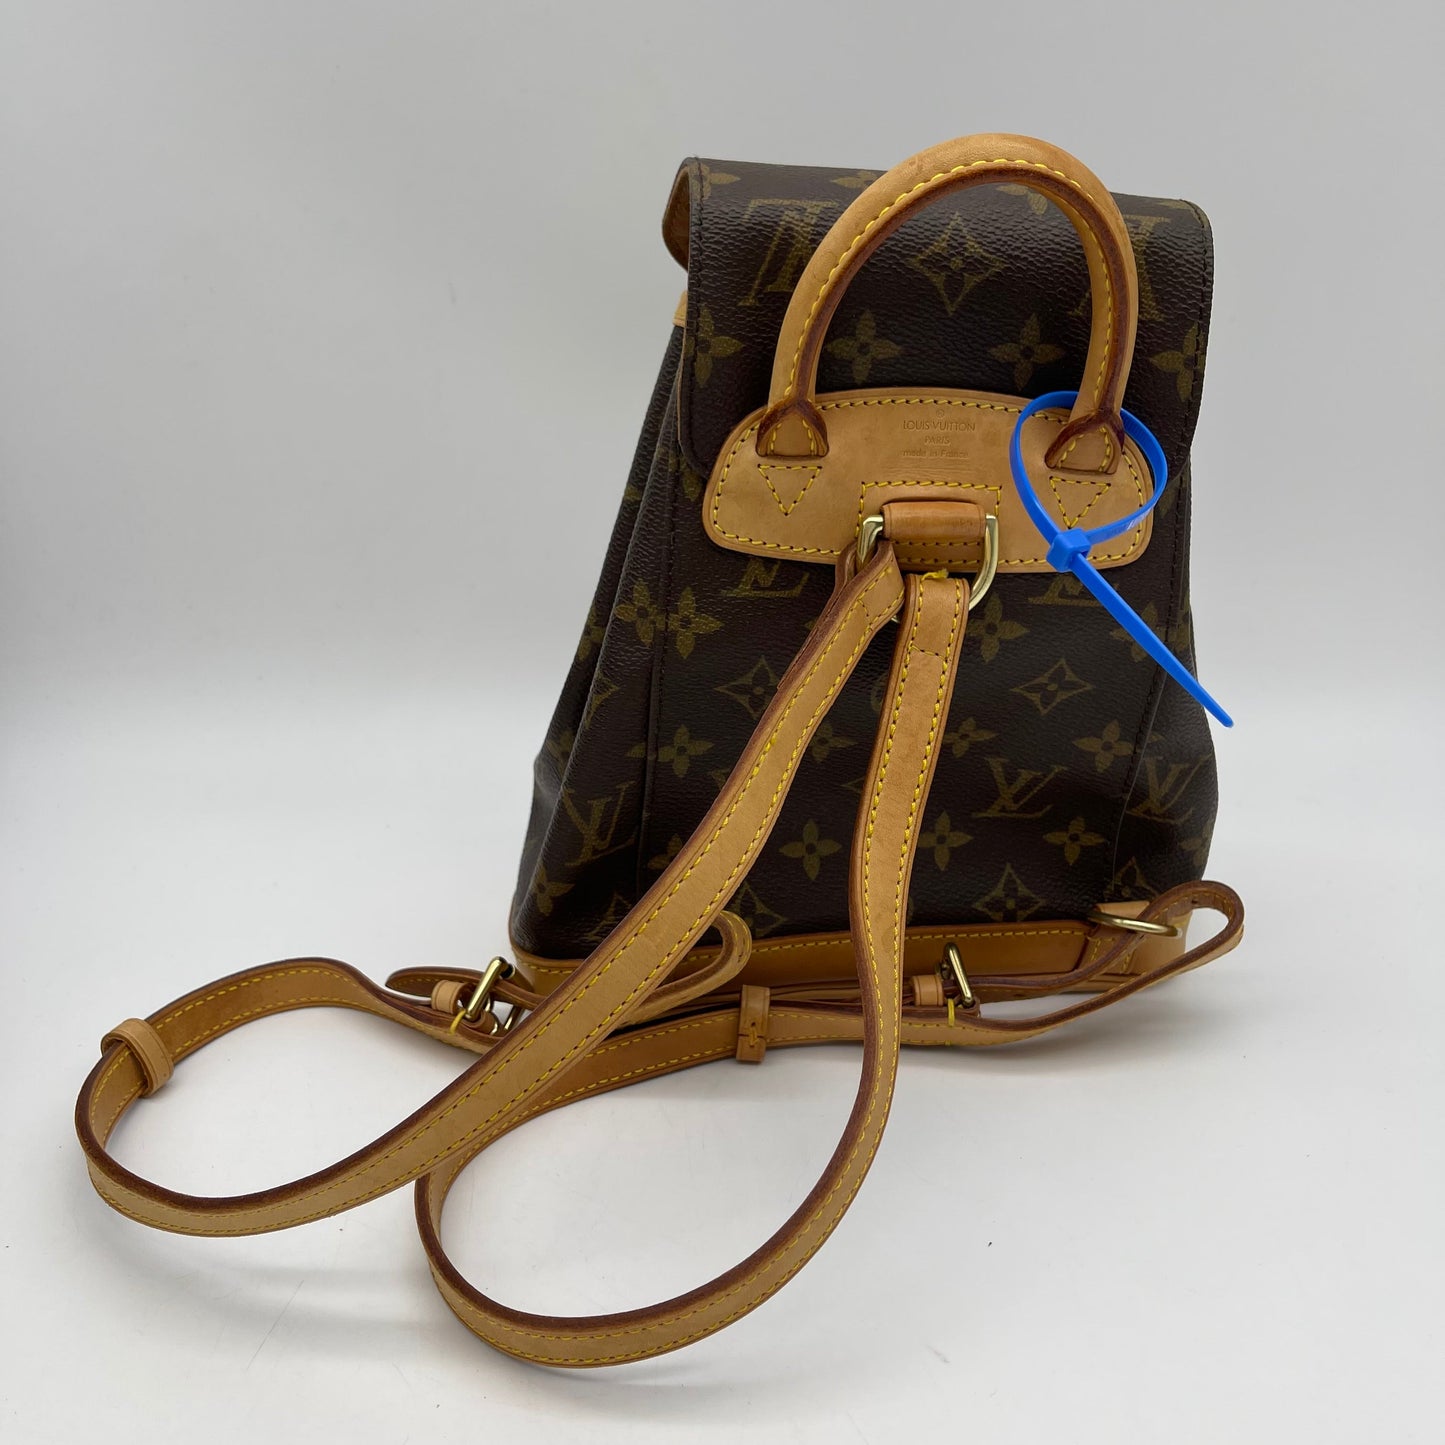 Backpack Luxury Designer Louis Vuitton, Size Small